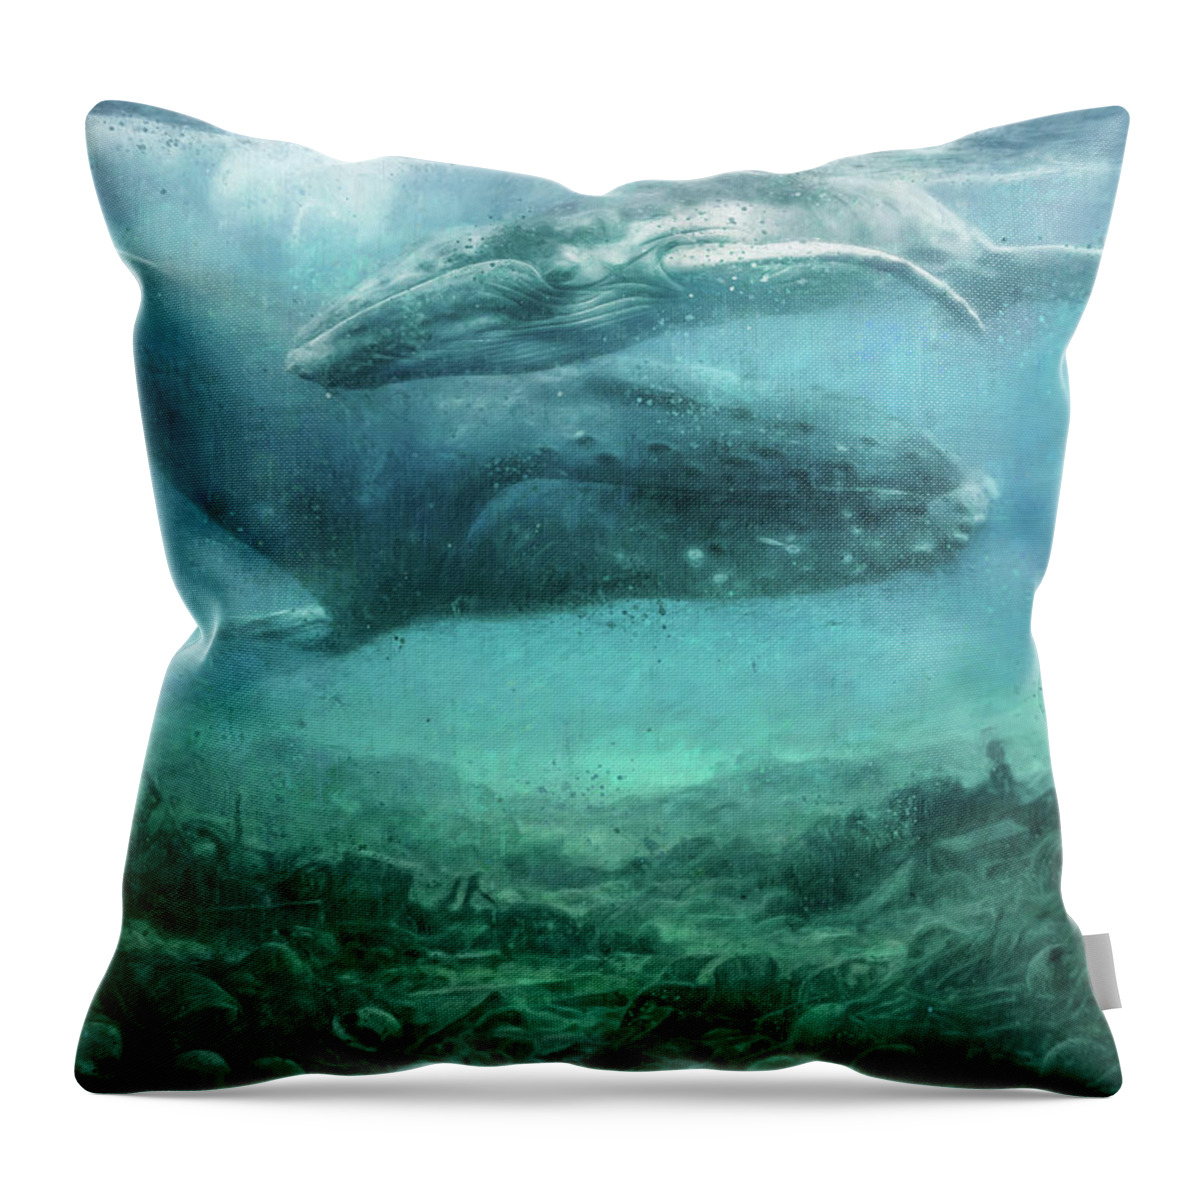 Ocean Throw Pillow featuring the painting The silence of the ocean - original artwork by Vart by Vart